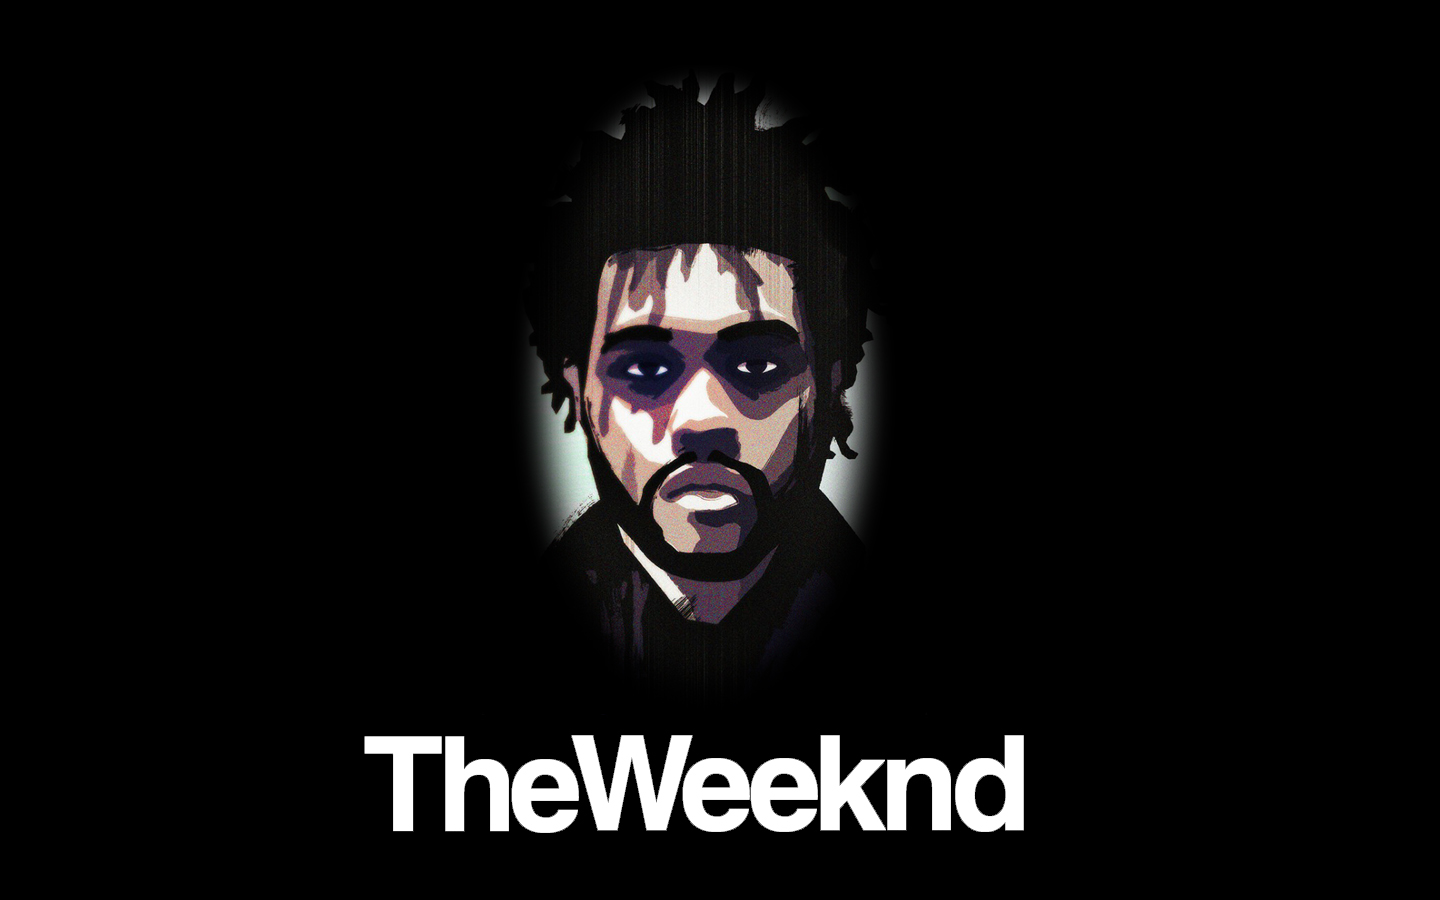 The One Other Wallpaper From Weeknd Are These